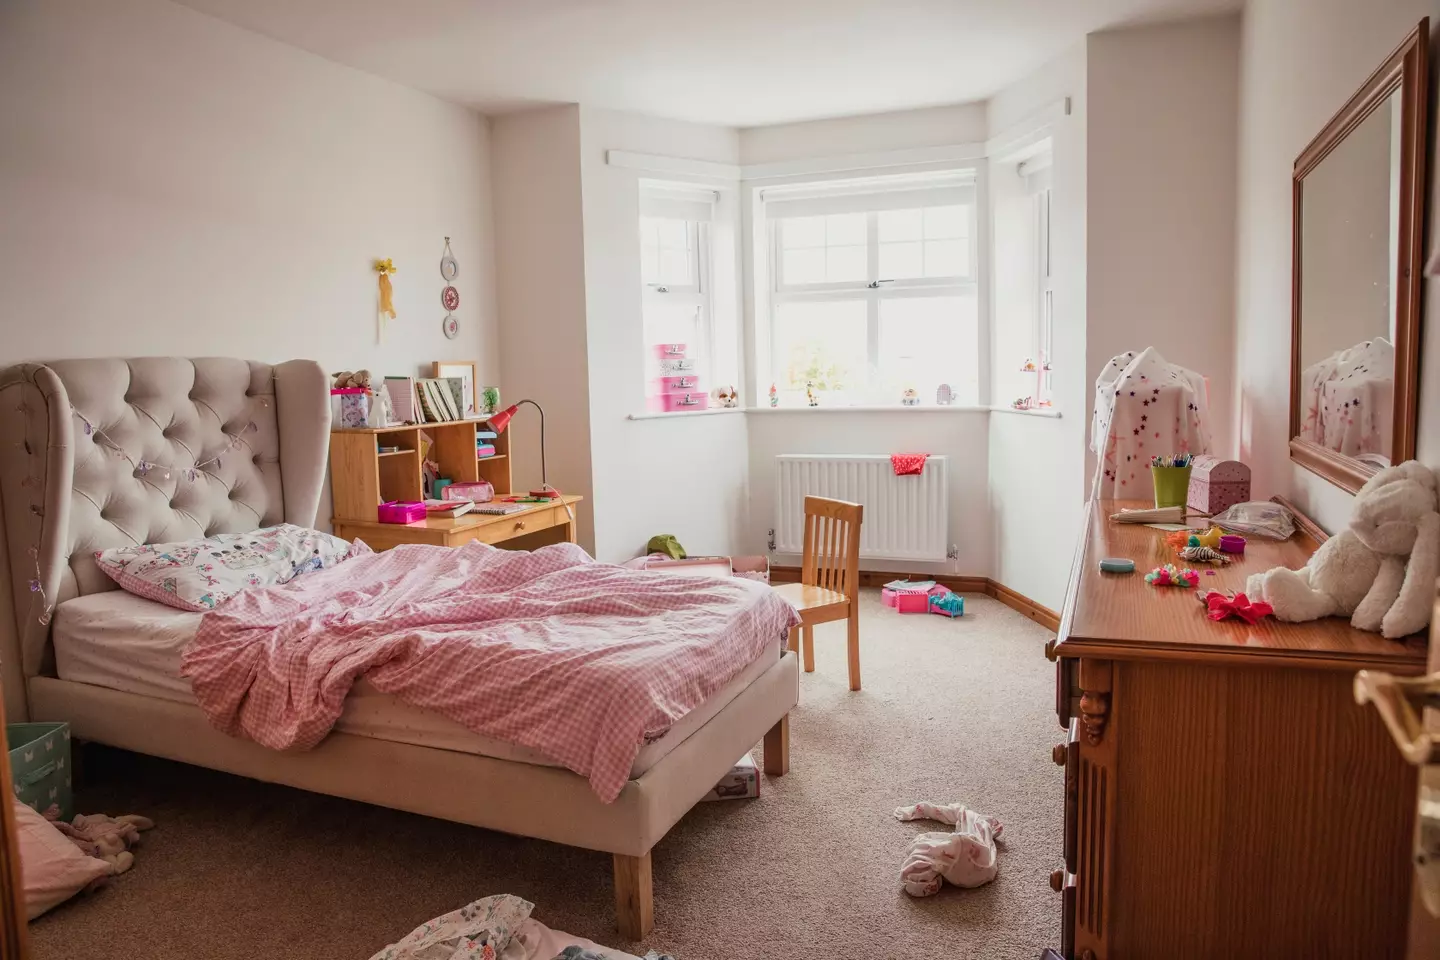 The mum explained how she tidied and 'decluttered' her teenage daughter's bedroom while she was away at camp.